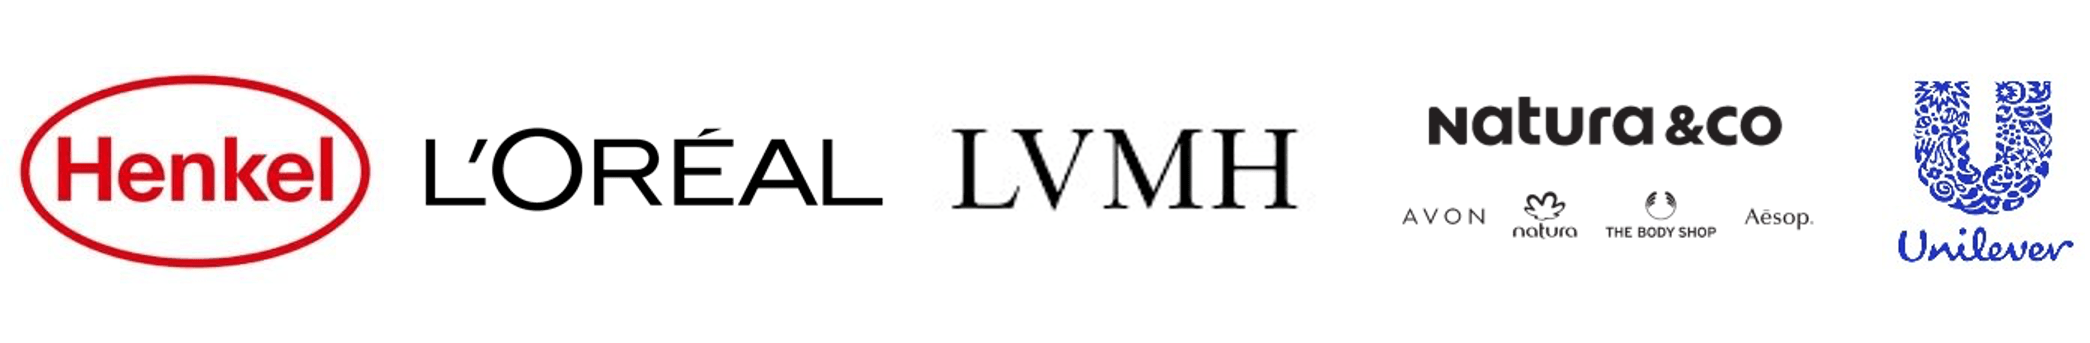 LVMH teams up with Dow to improve sustainable packaging across